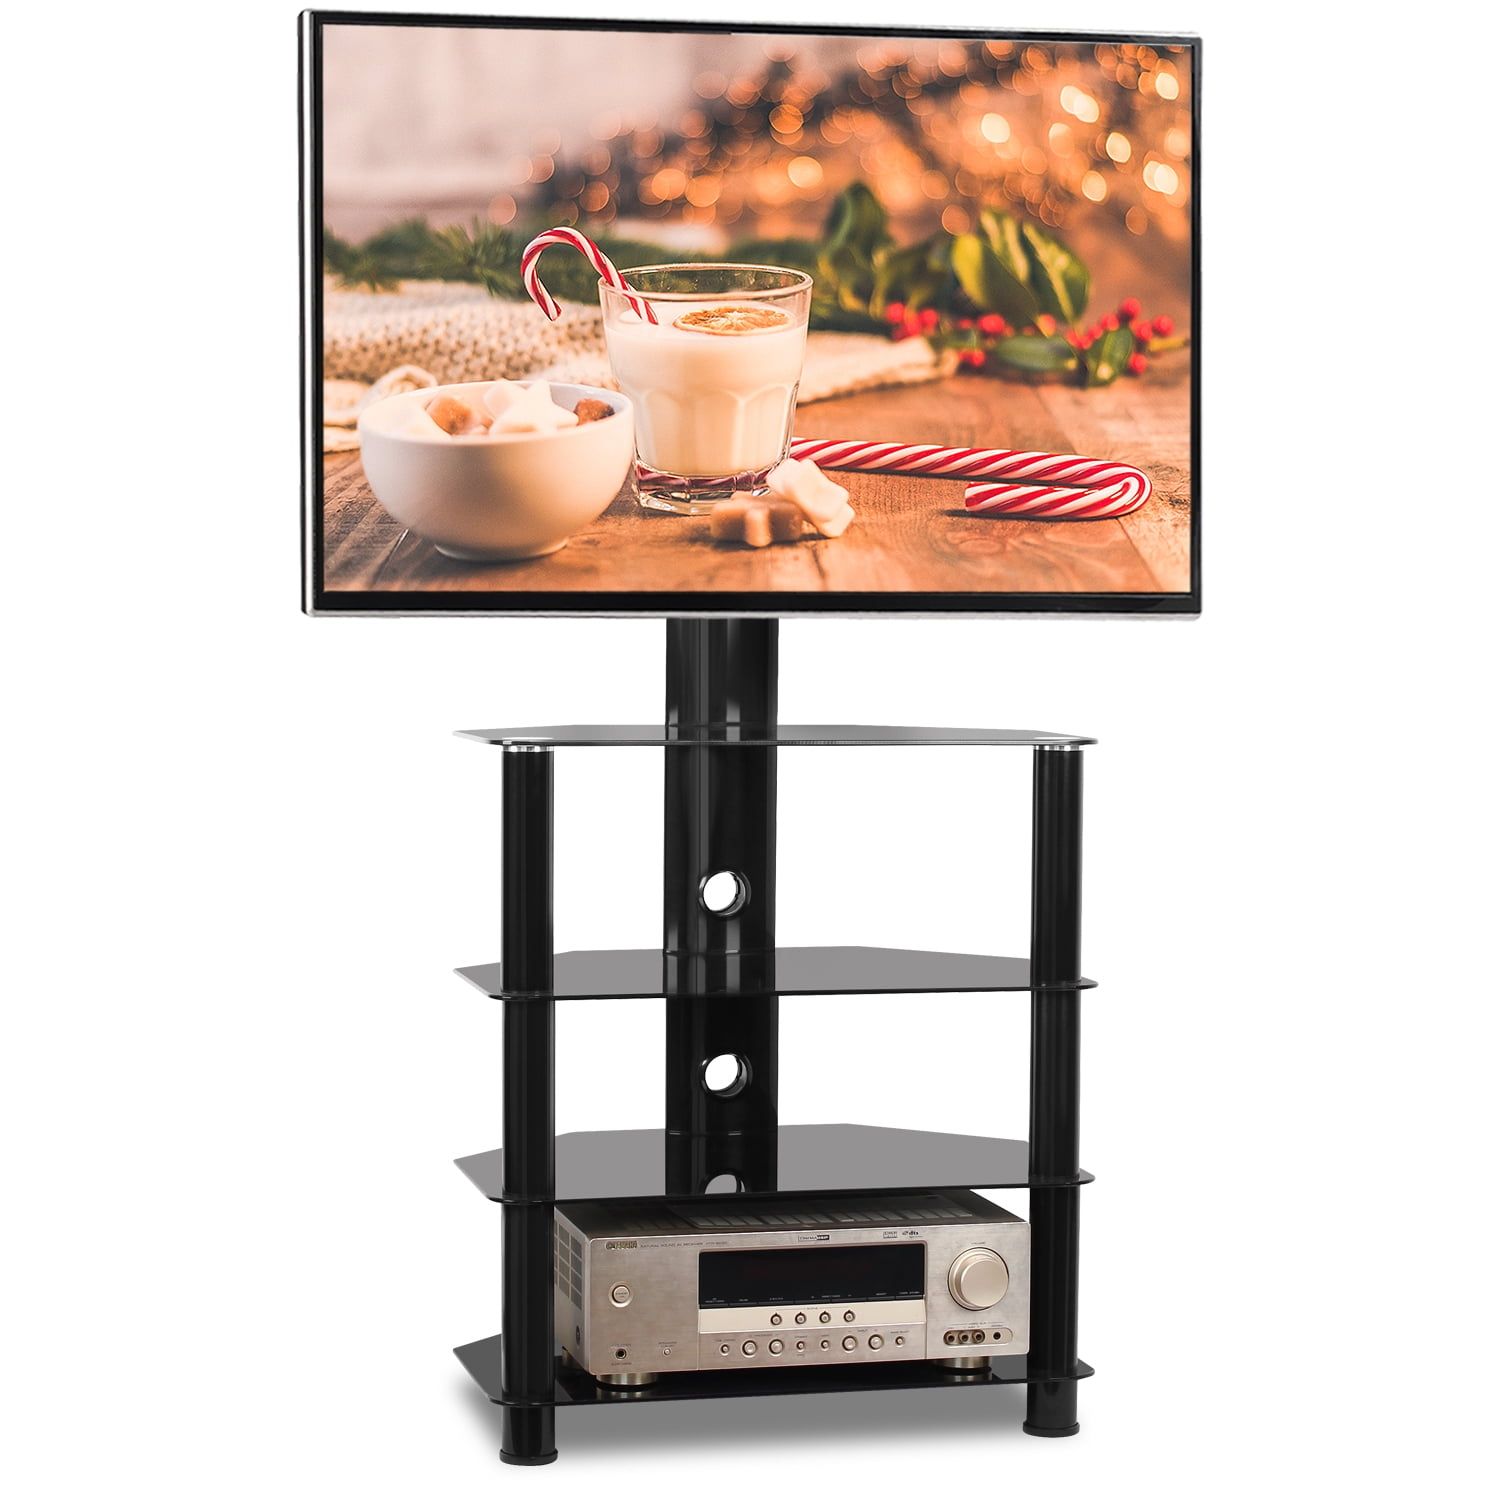 Modern Floor Black Glass Tv Stand For 32" 55" Flat Screen Lcd Led Tvs Throughout Top Shelf Mount Tv Stands (View 16 of 20)